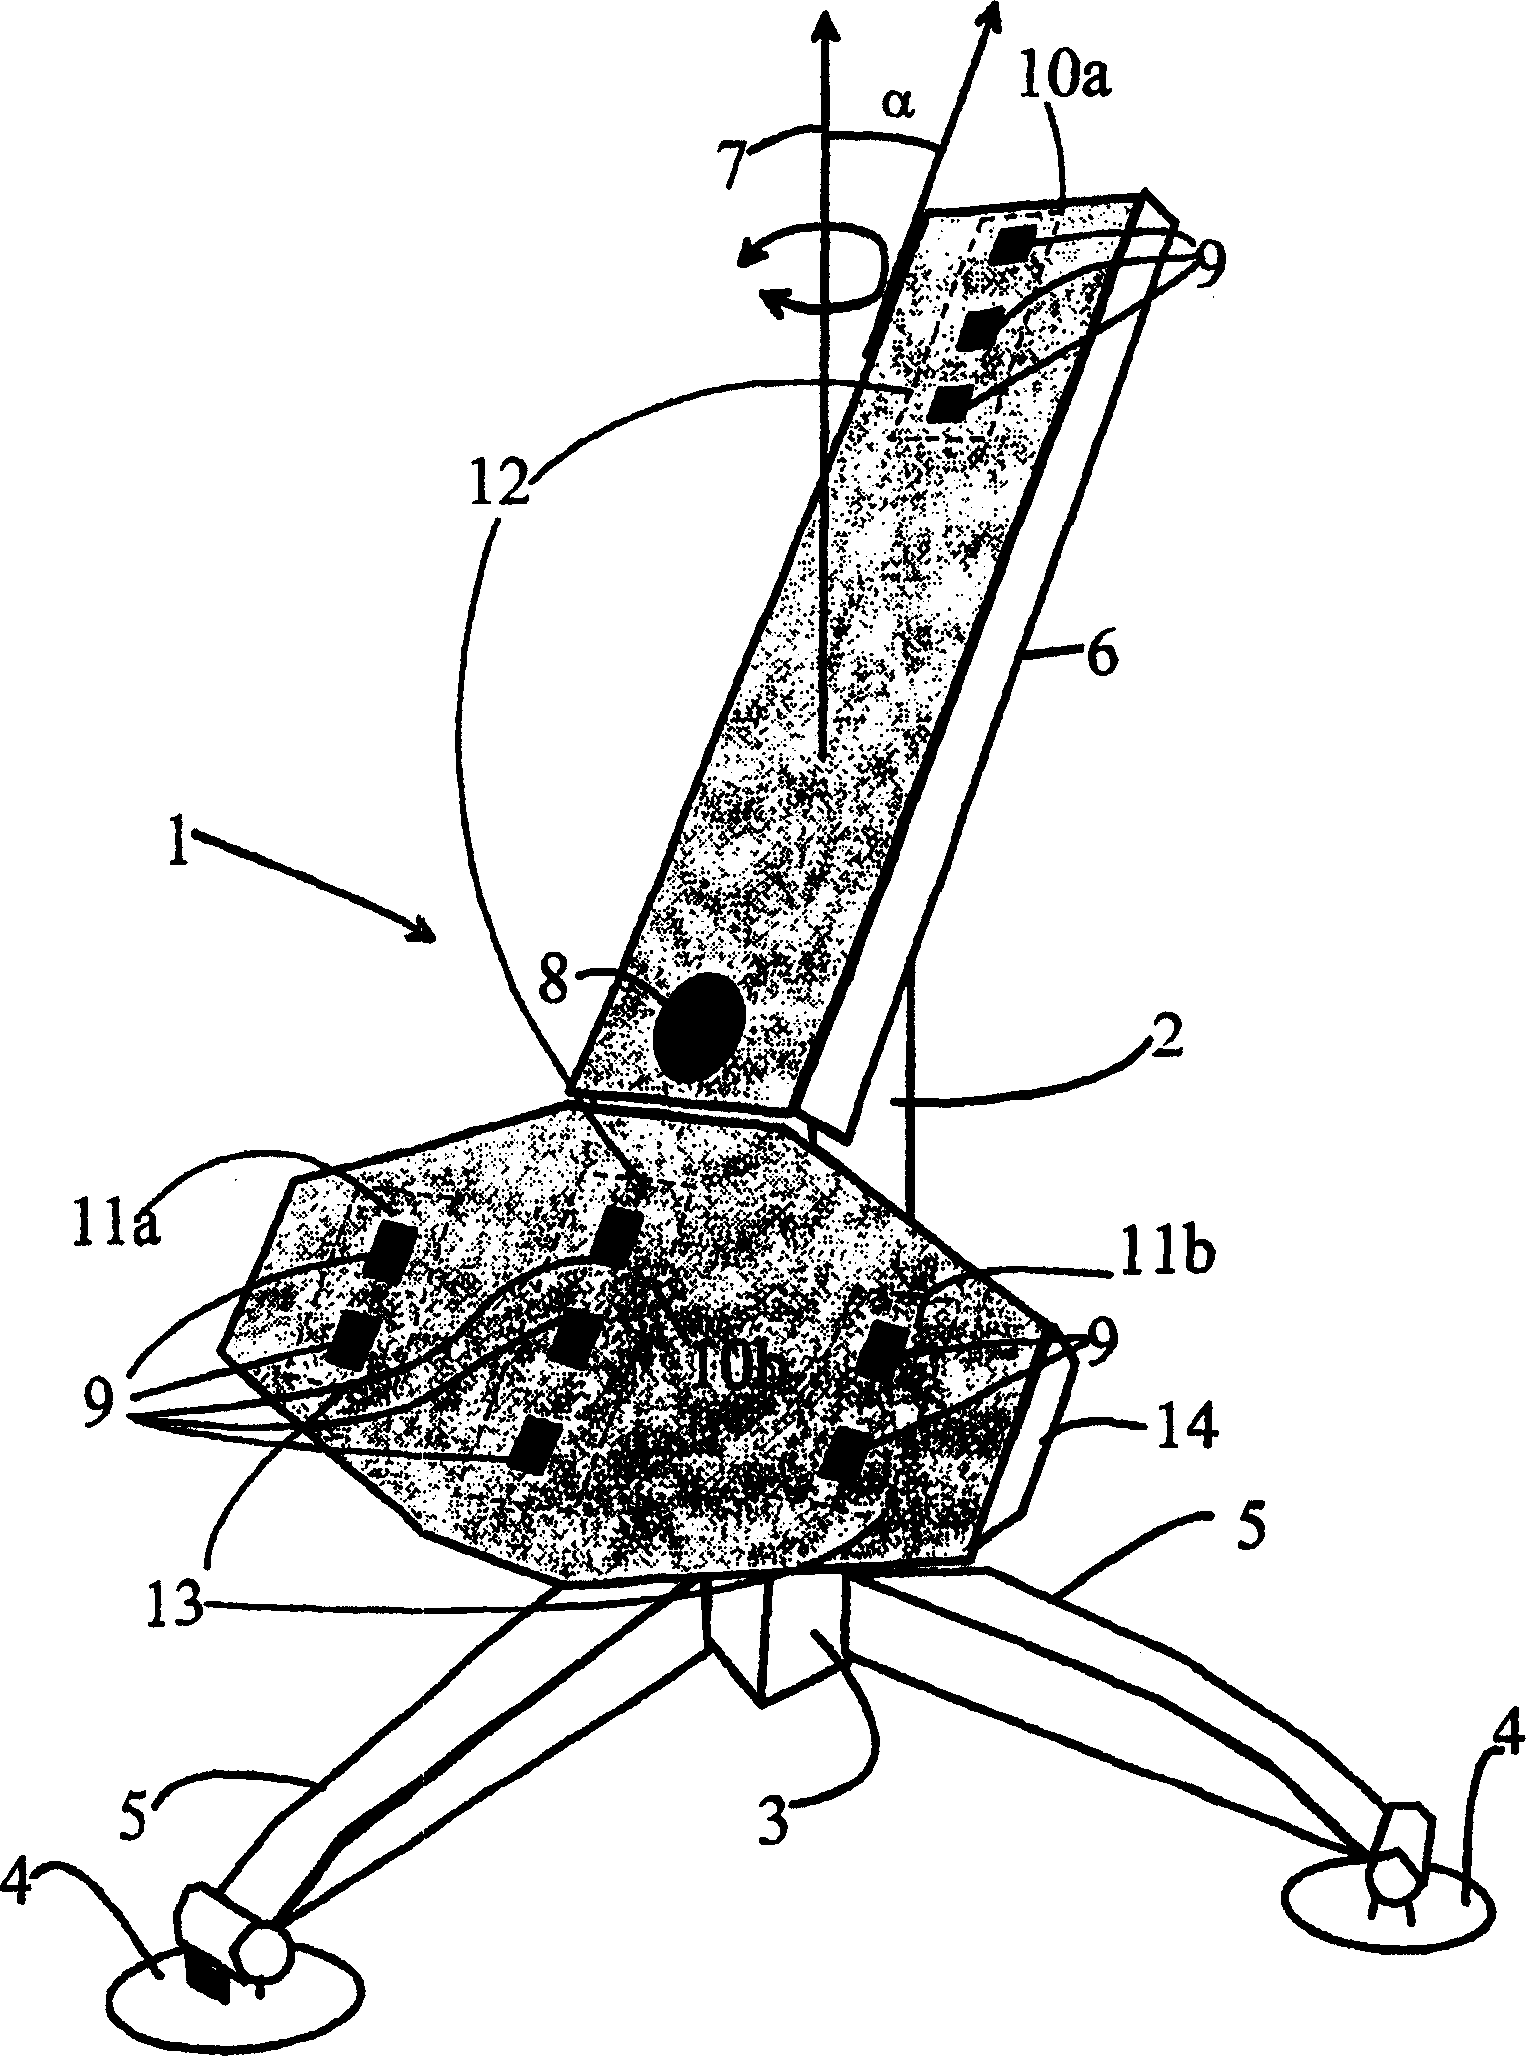 Antenna system and method for measuring the azimuth and elevation angles of an active, signal sending radiosonde